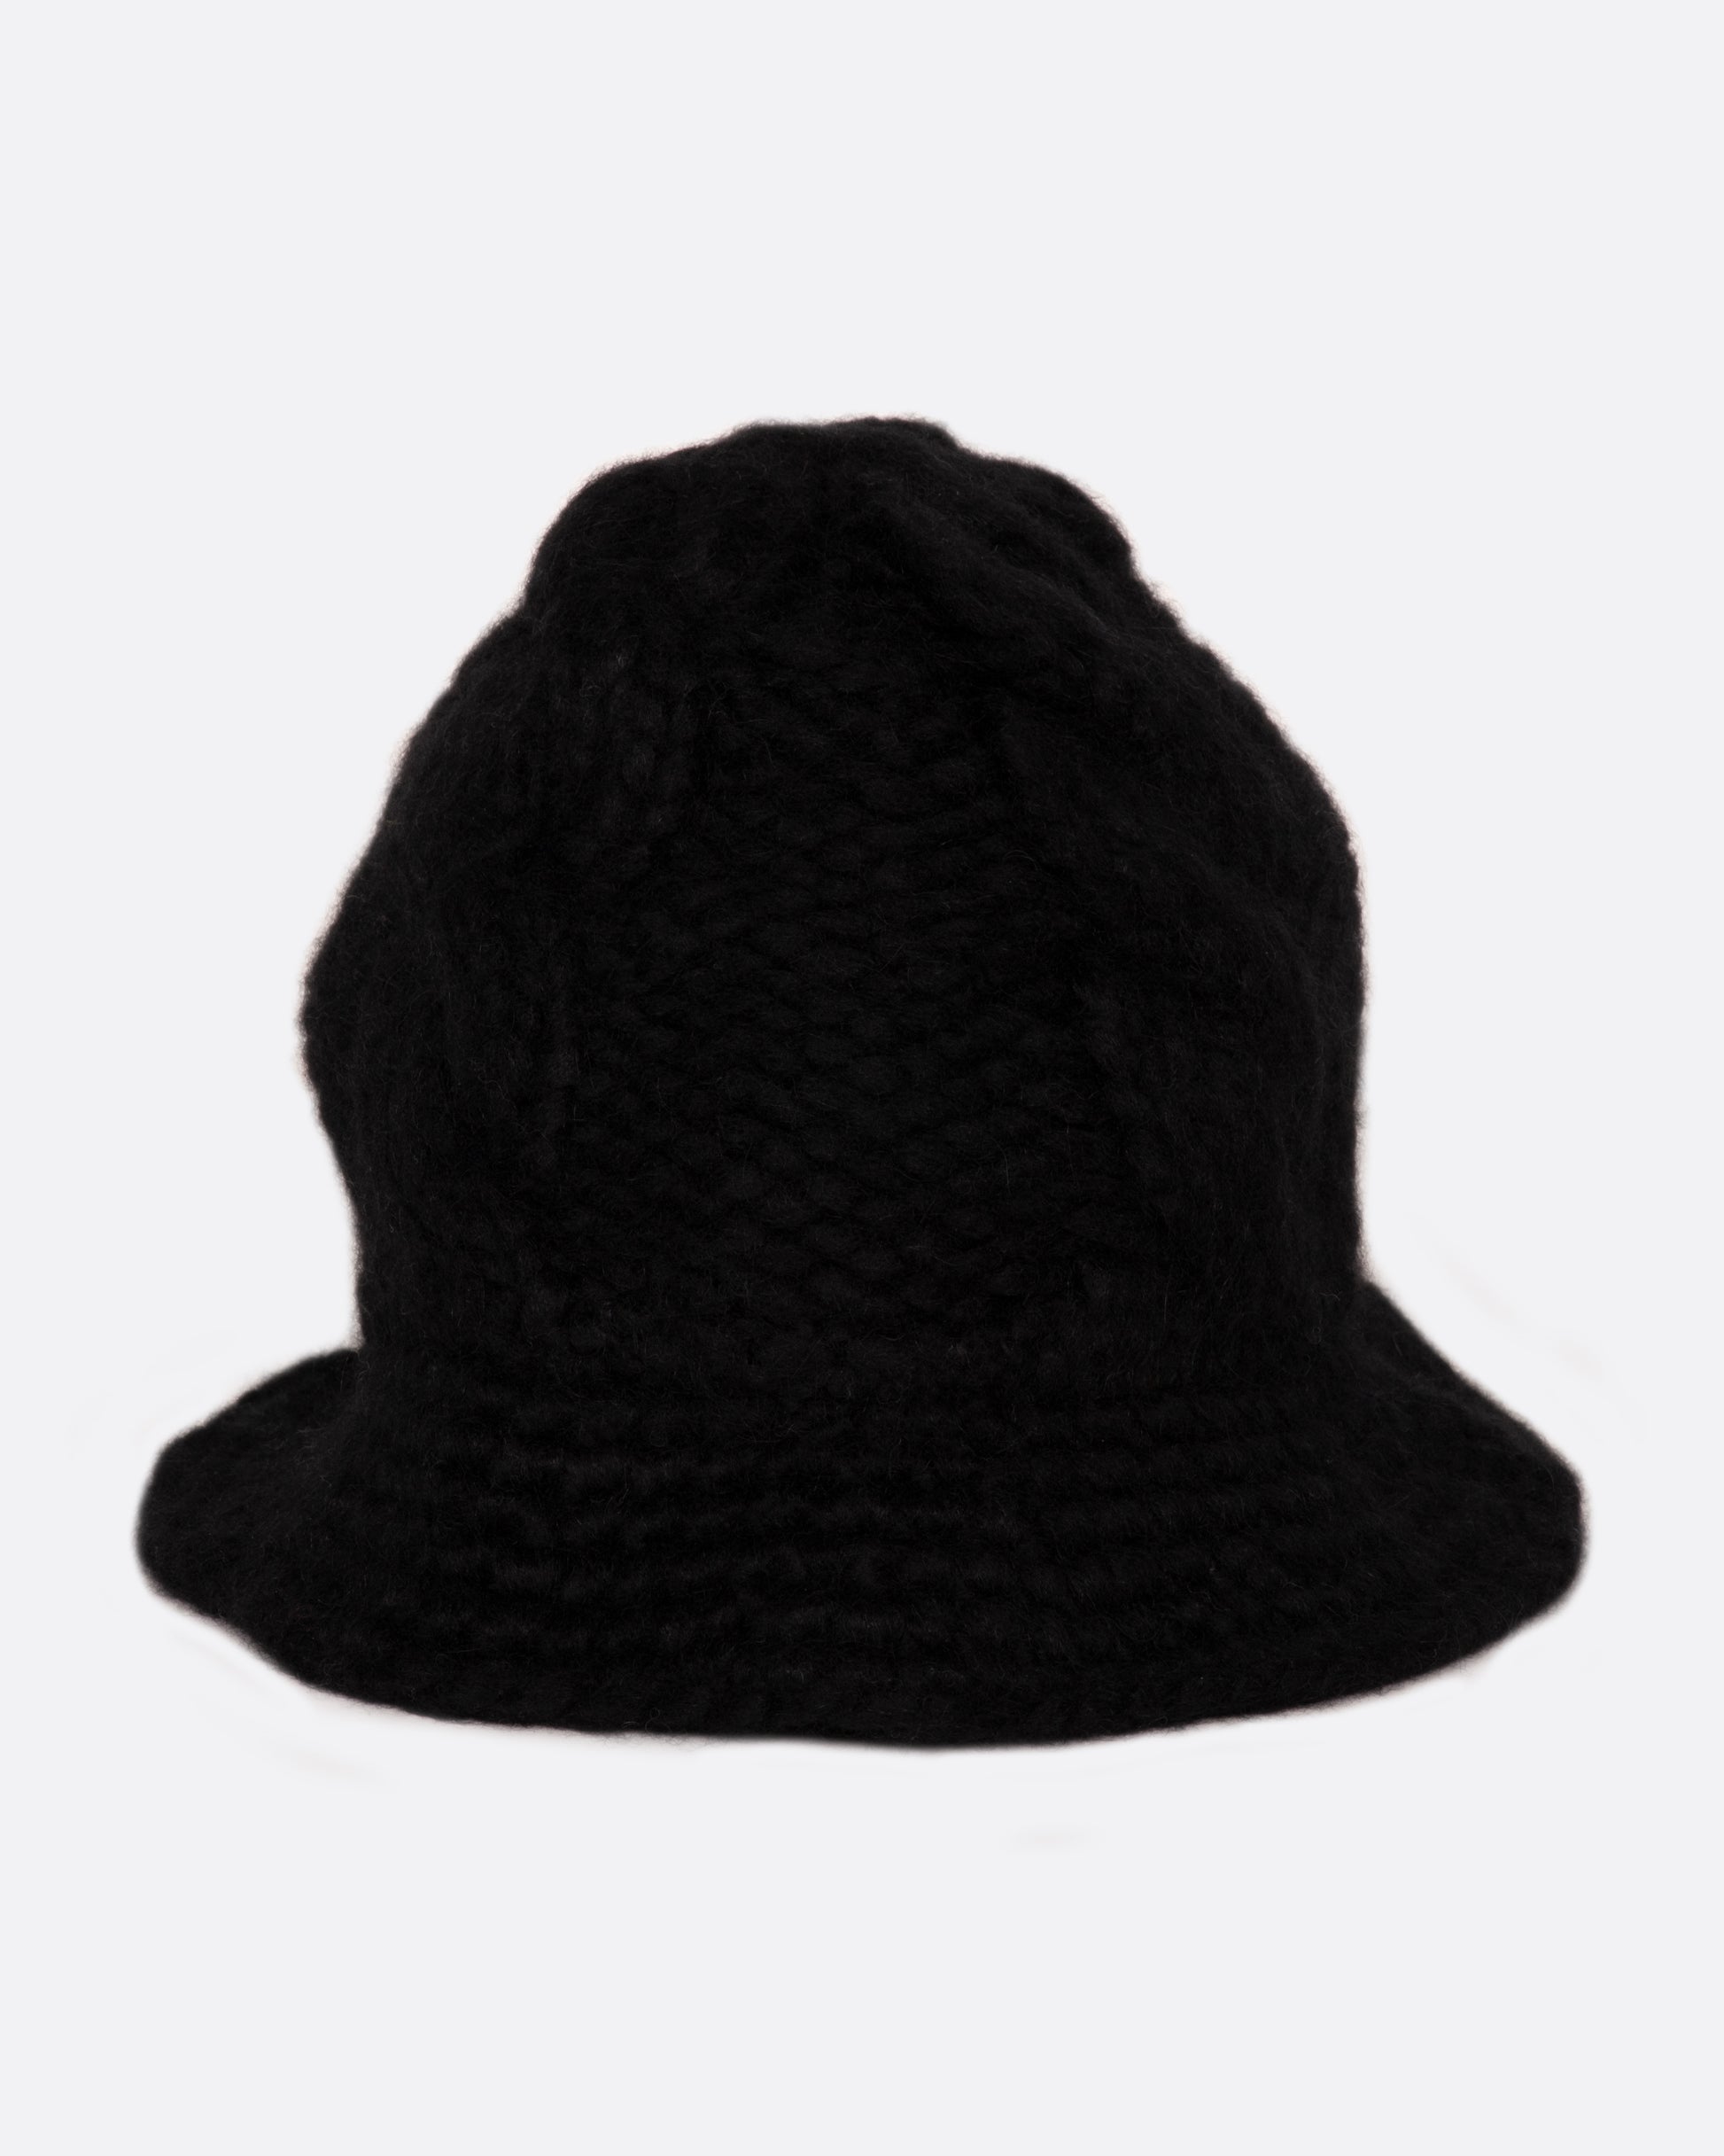 A chunky cable knit bucket hat with a narrow brim.